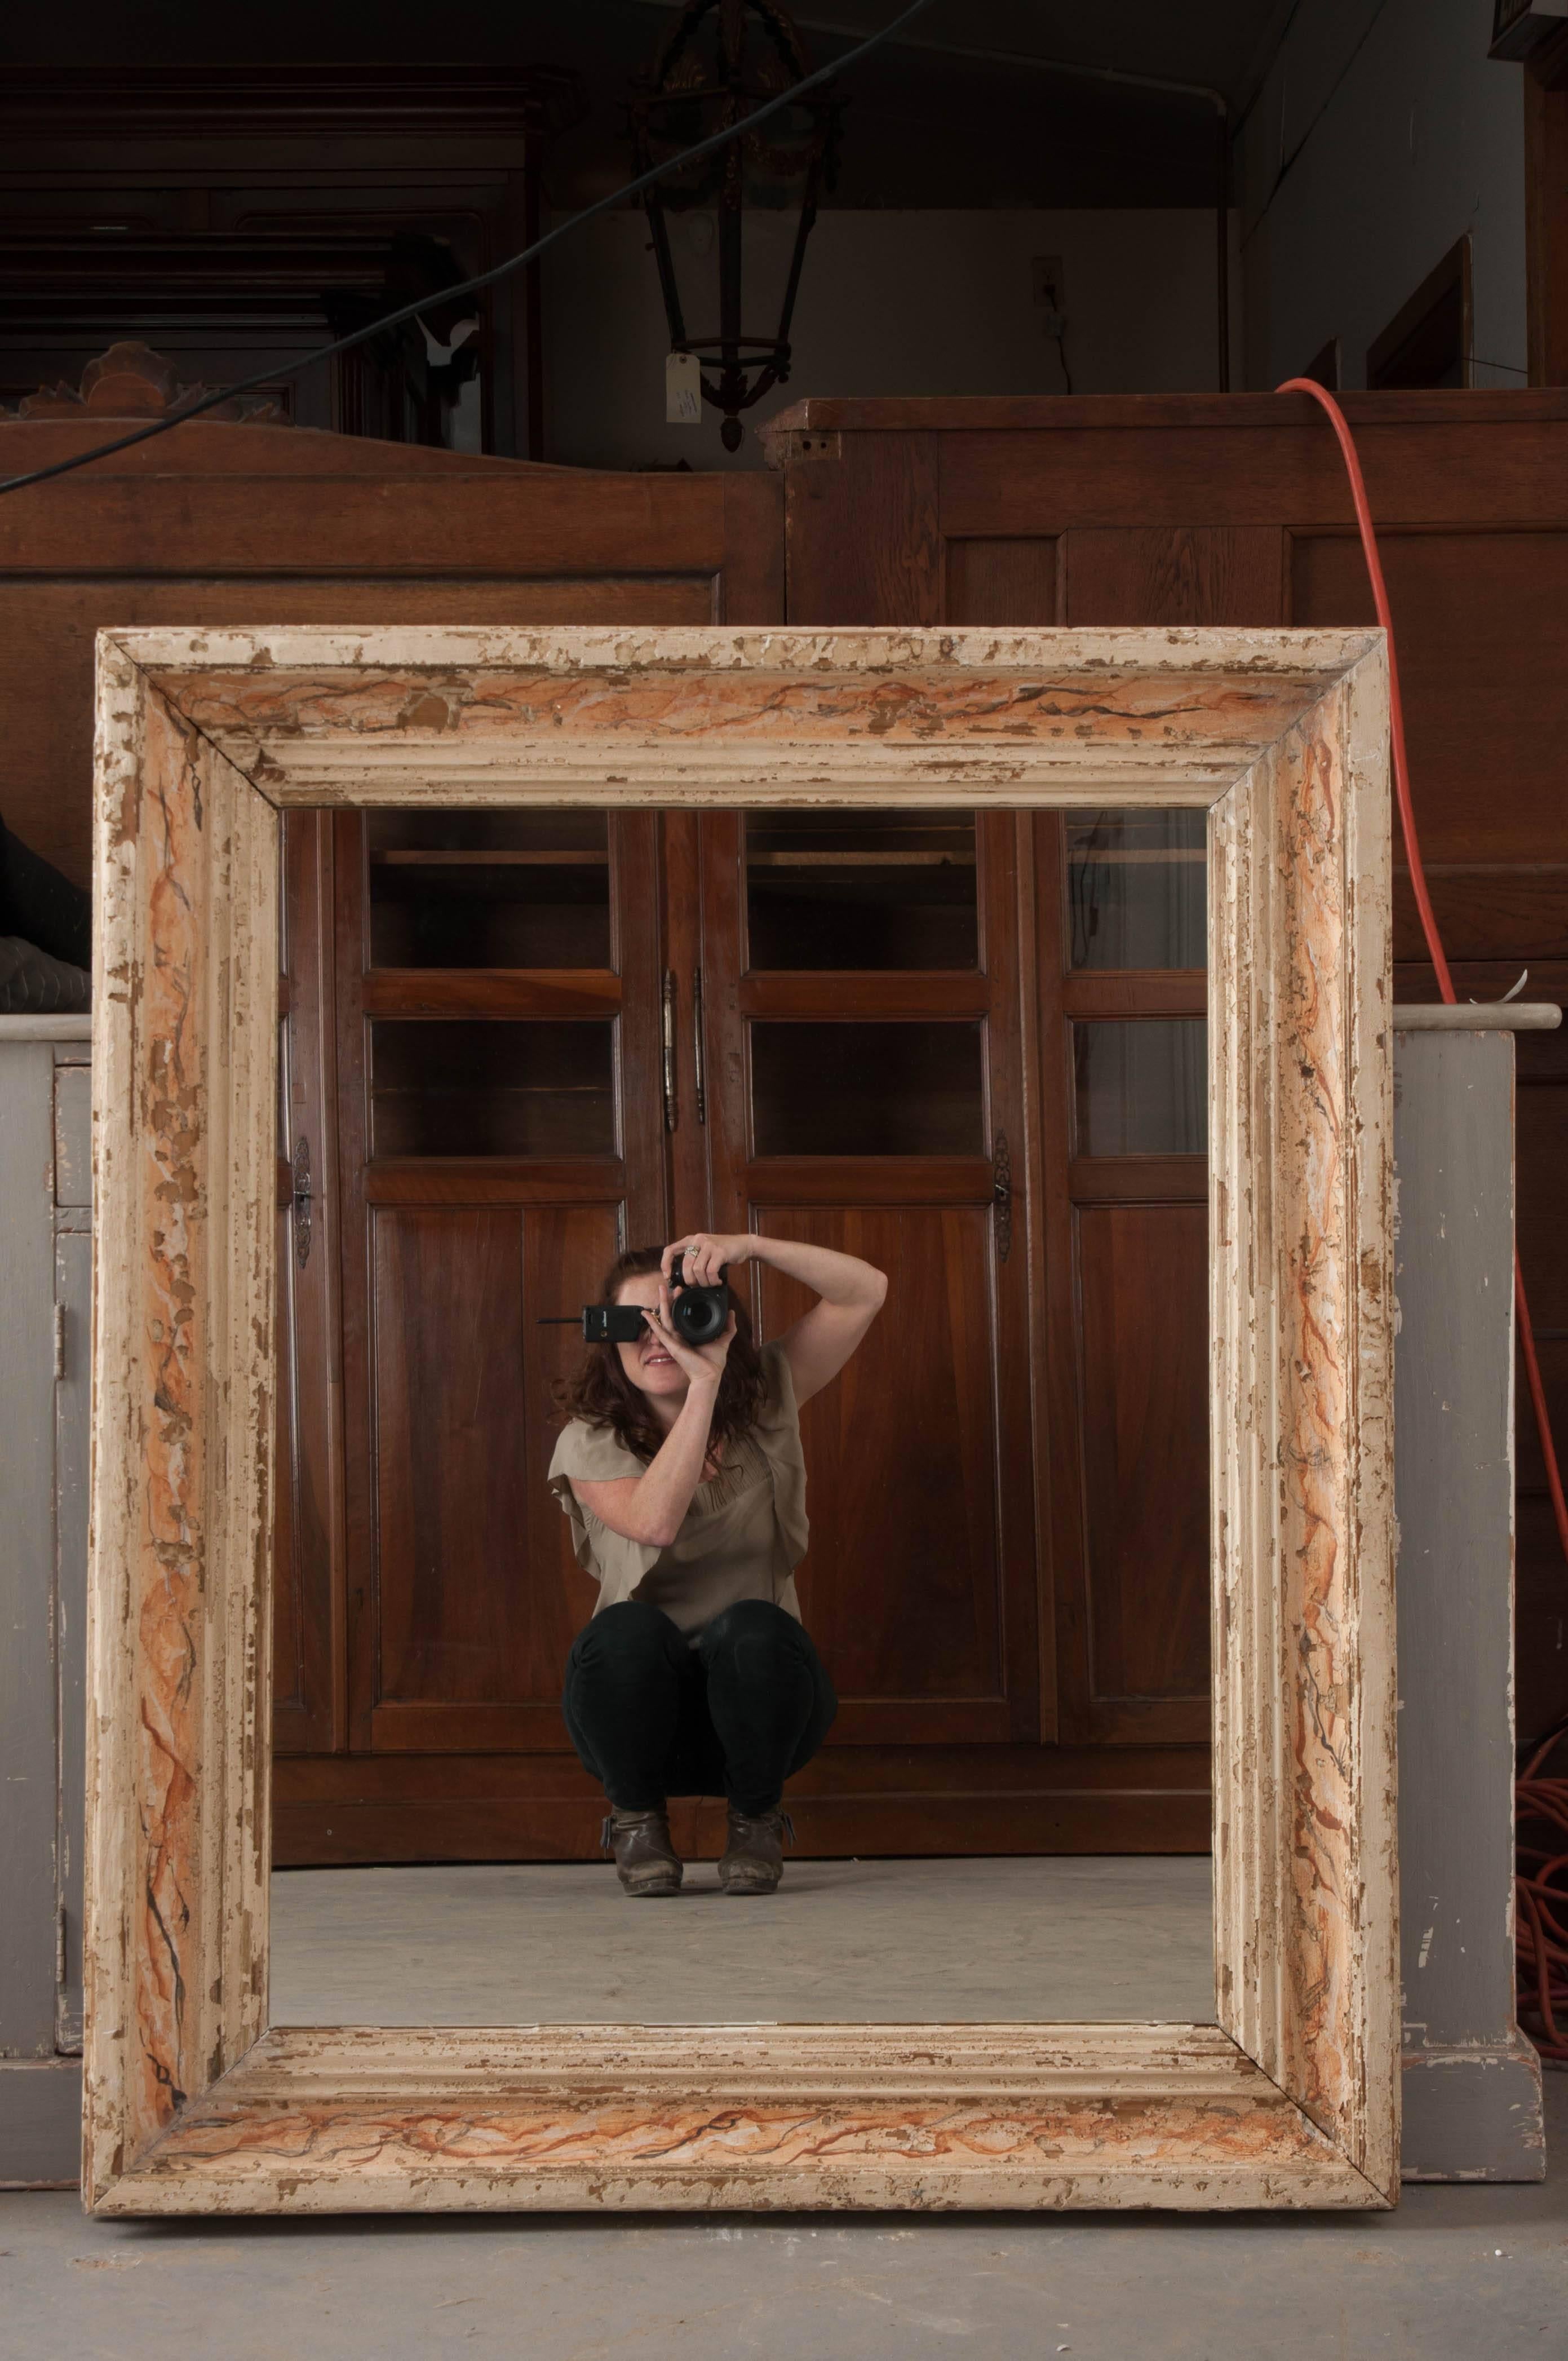 An exceptional antique Italian mirror with painted faux-marble surround. The mirror was made towards the middle of the 19th century and has a linear, moulded surround which has the wonderful painted faux-marble finish. The frame has been painted a